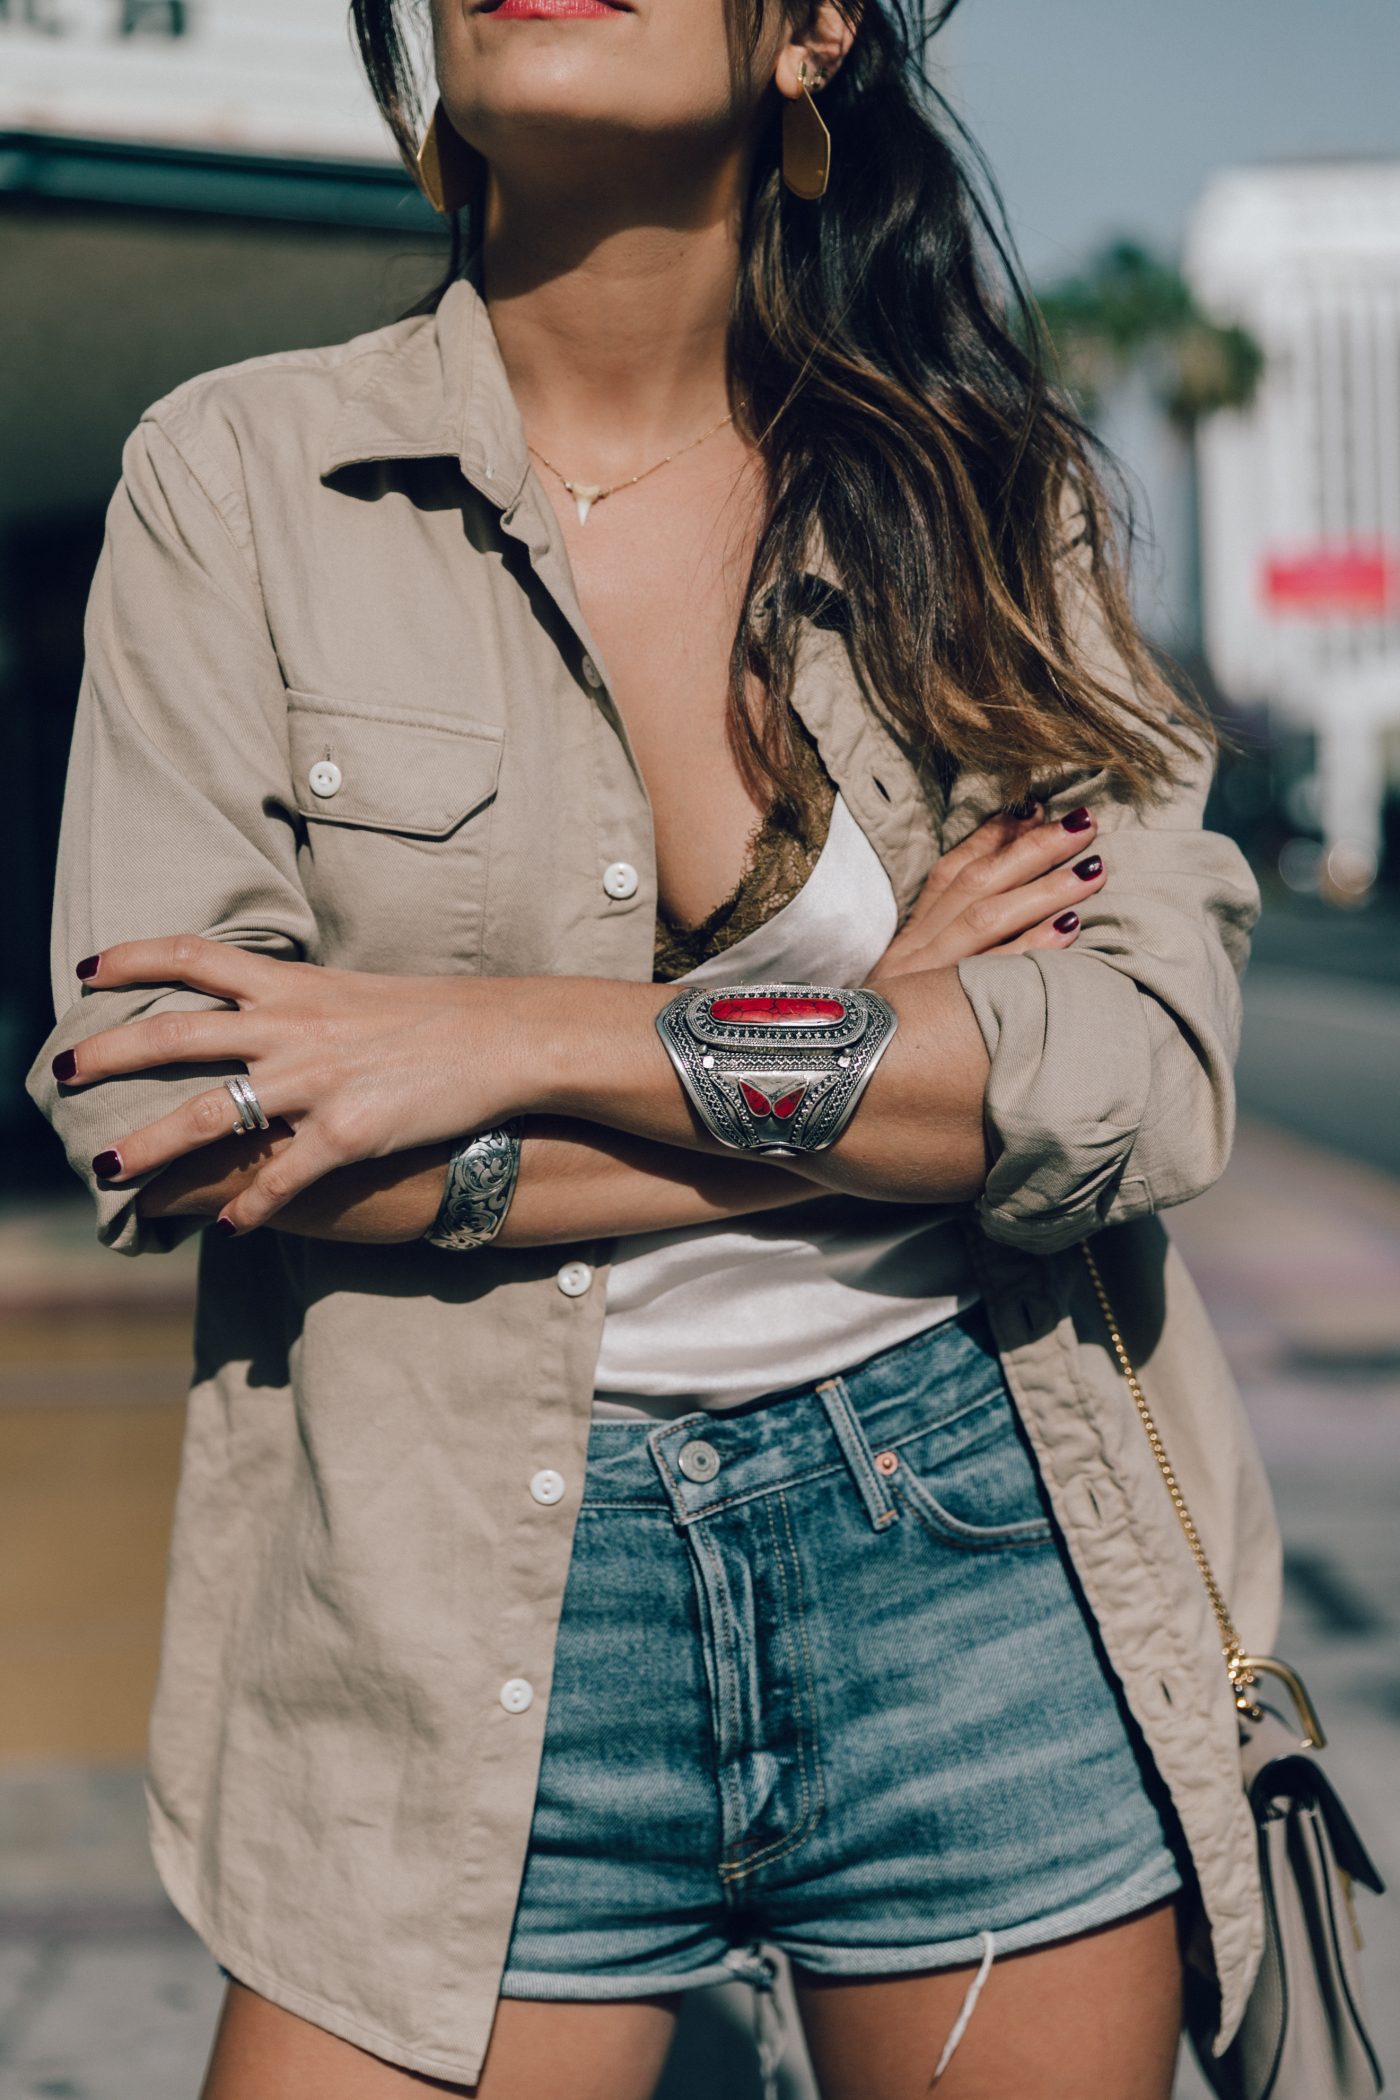 Levis_Shirt-GRLFRND_Denim-Chloe_Bag-Los_Angeles-Shorts-Outfit-Street_Style-Ray_Ban-Street_Style-Collage_Vintage-8